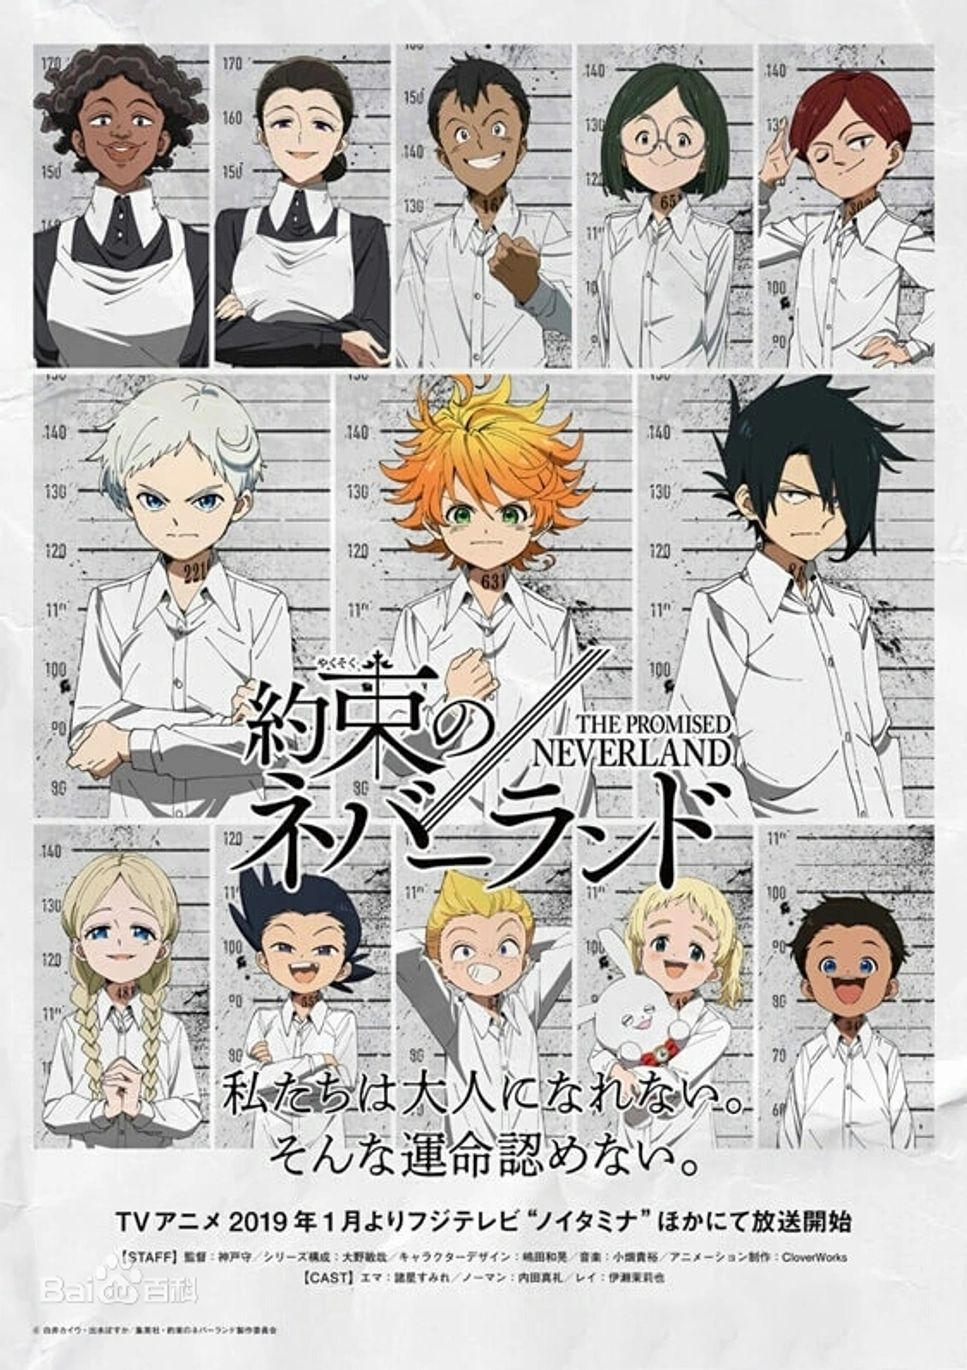 Takahiro Obata Isabellas Lullaby The Promised Neverland Emotional Anime On Piano Vol 2 